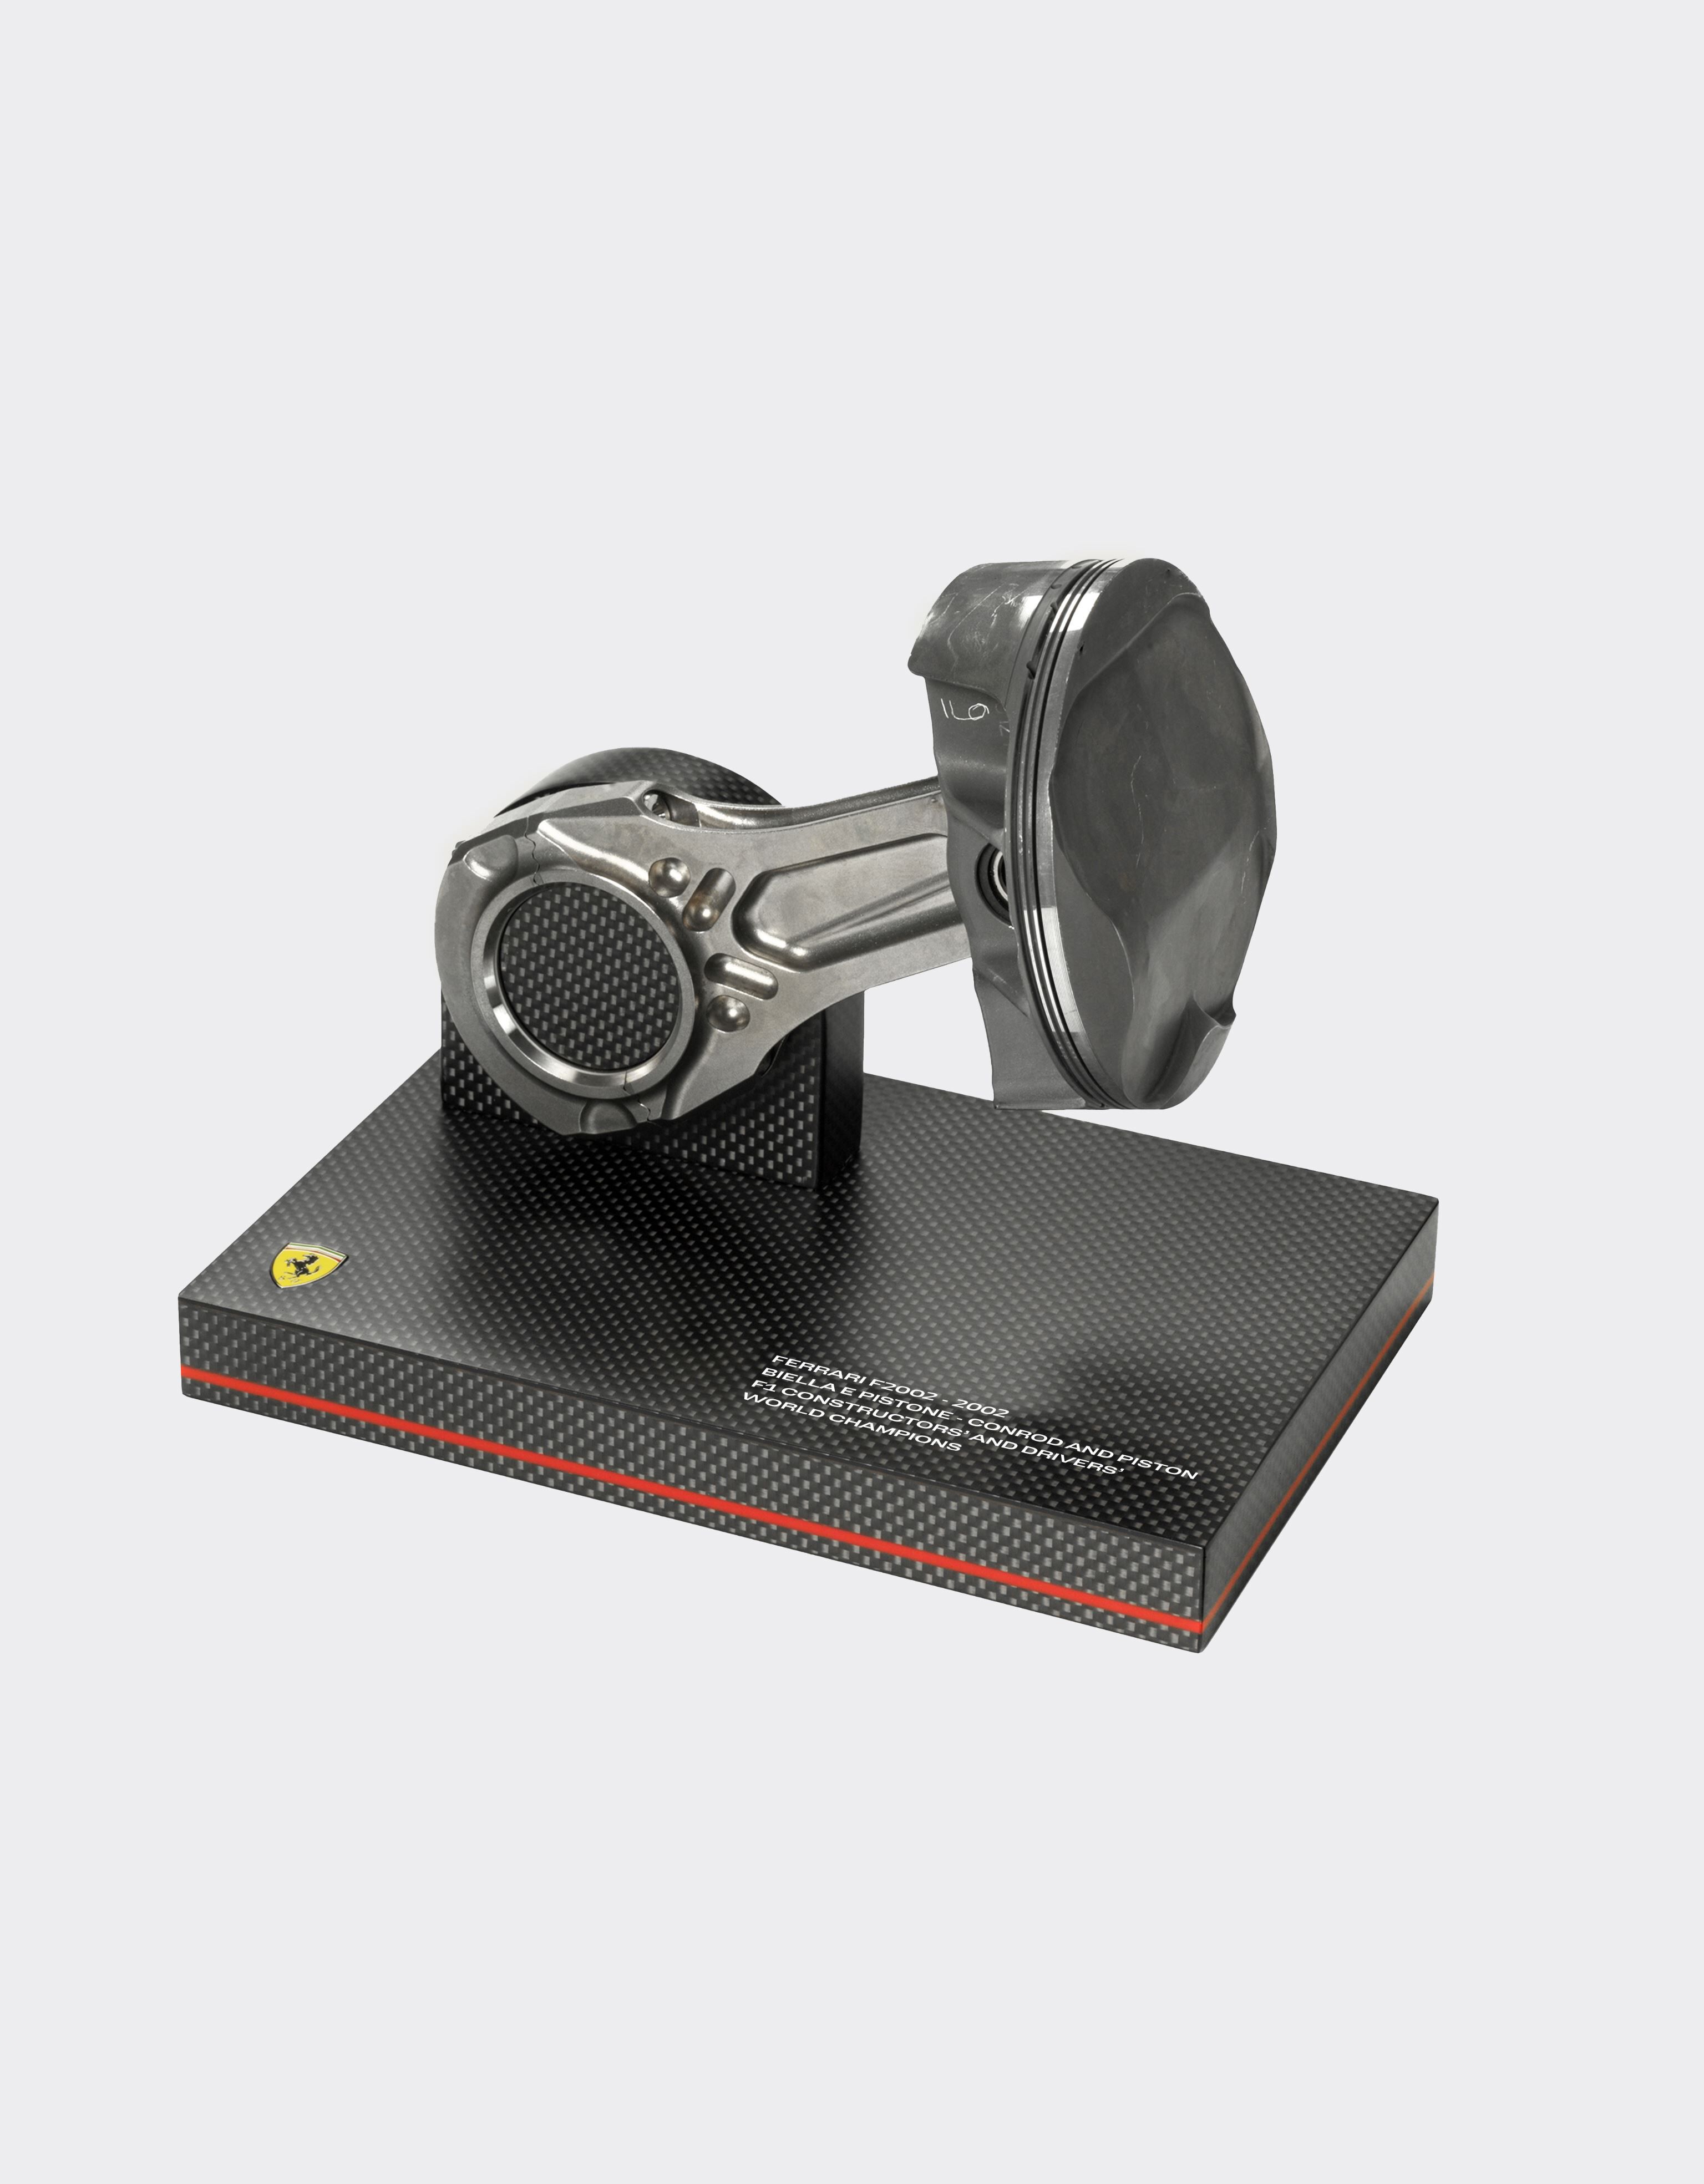 Ferrari Original connecting rod and piston set from the F2002, winner of the 2002 Constructors’ and Drivers’ Championships MULTICOLOUR 48730f